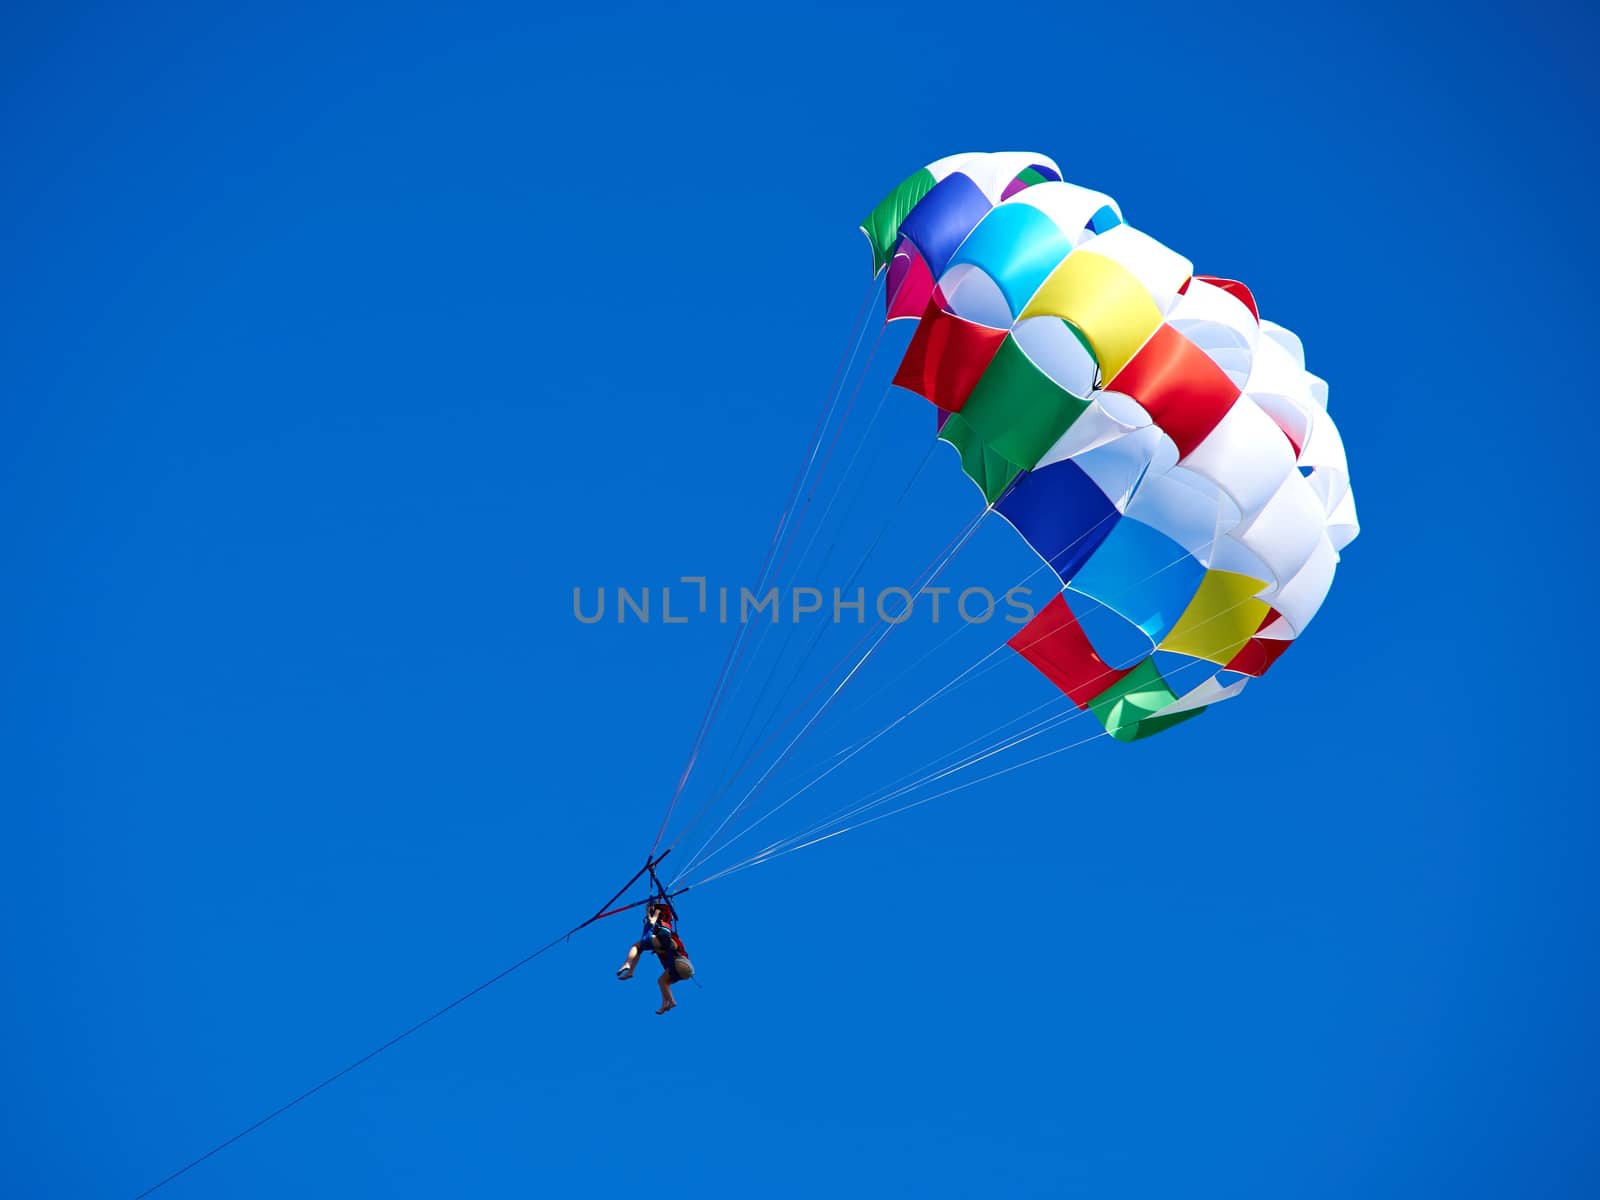 Parasailing with colorful parachute in clear blue sky popular vacation activity in summer resorts 